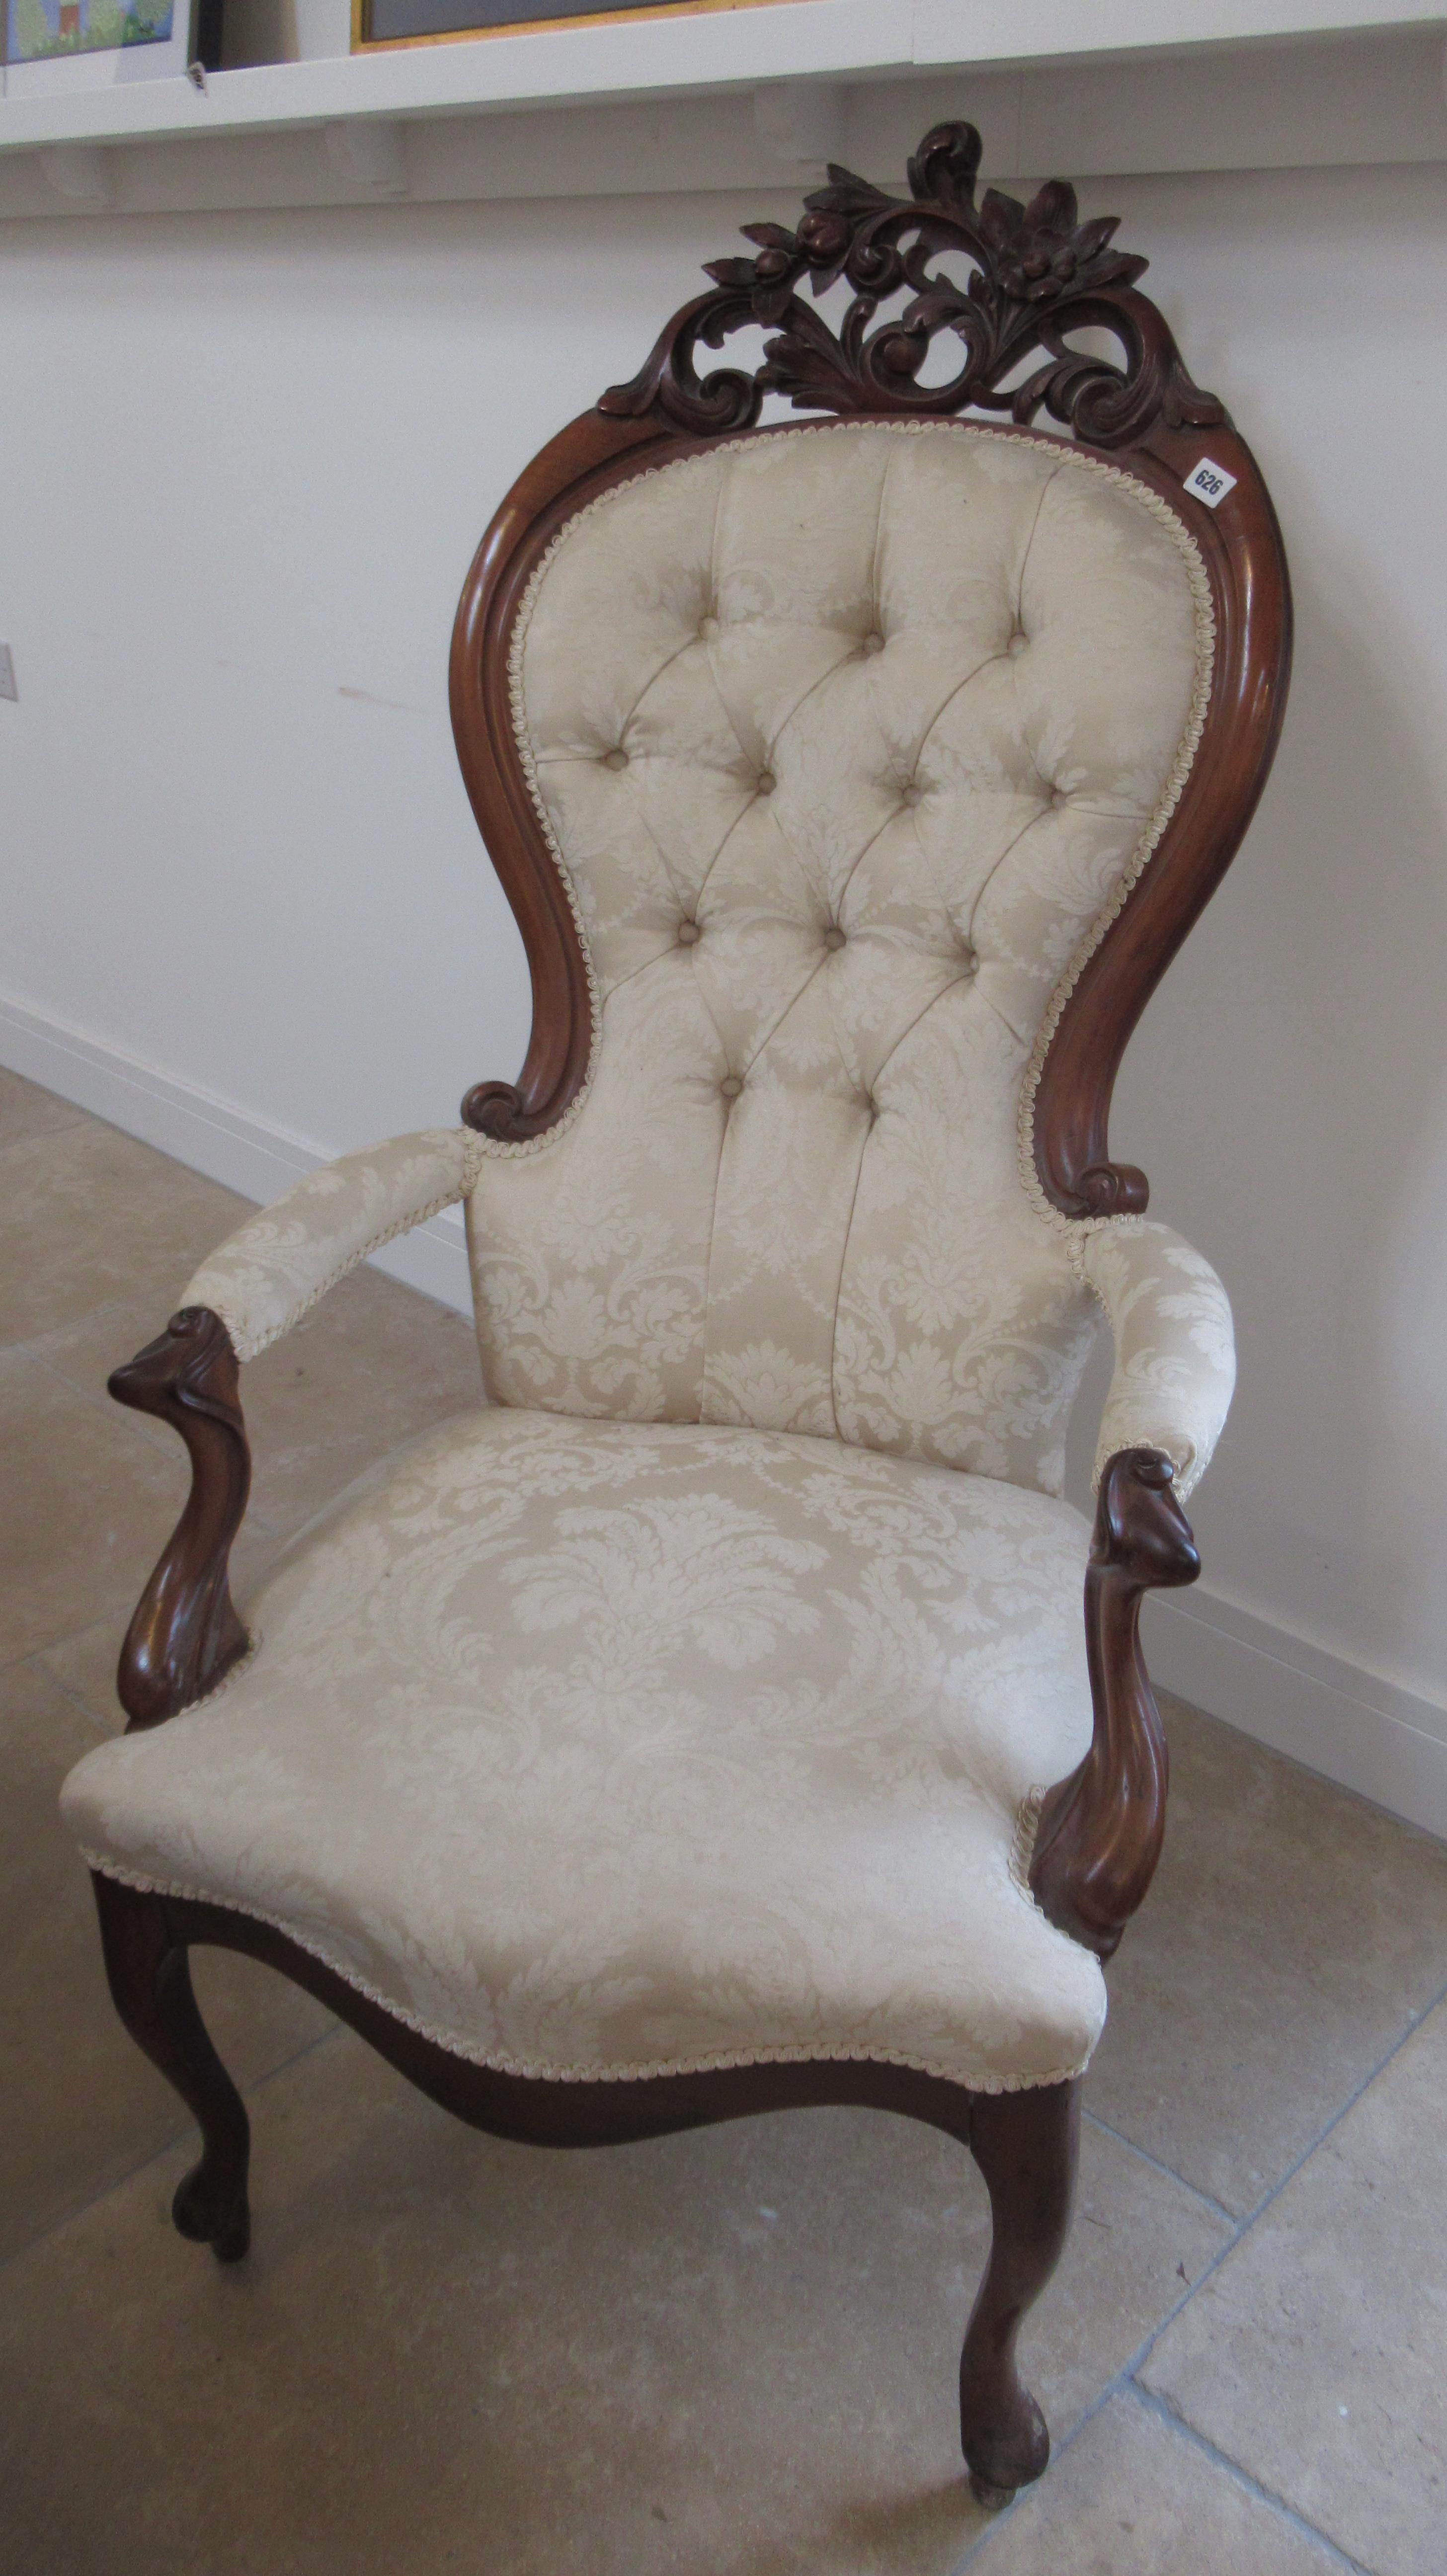 A Victorian style spoon back armchair - in good condition